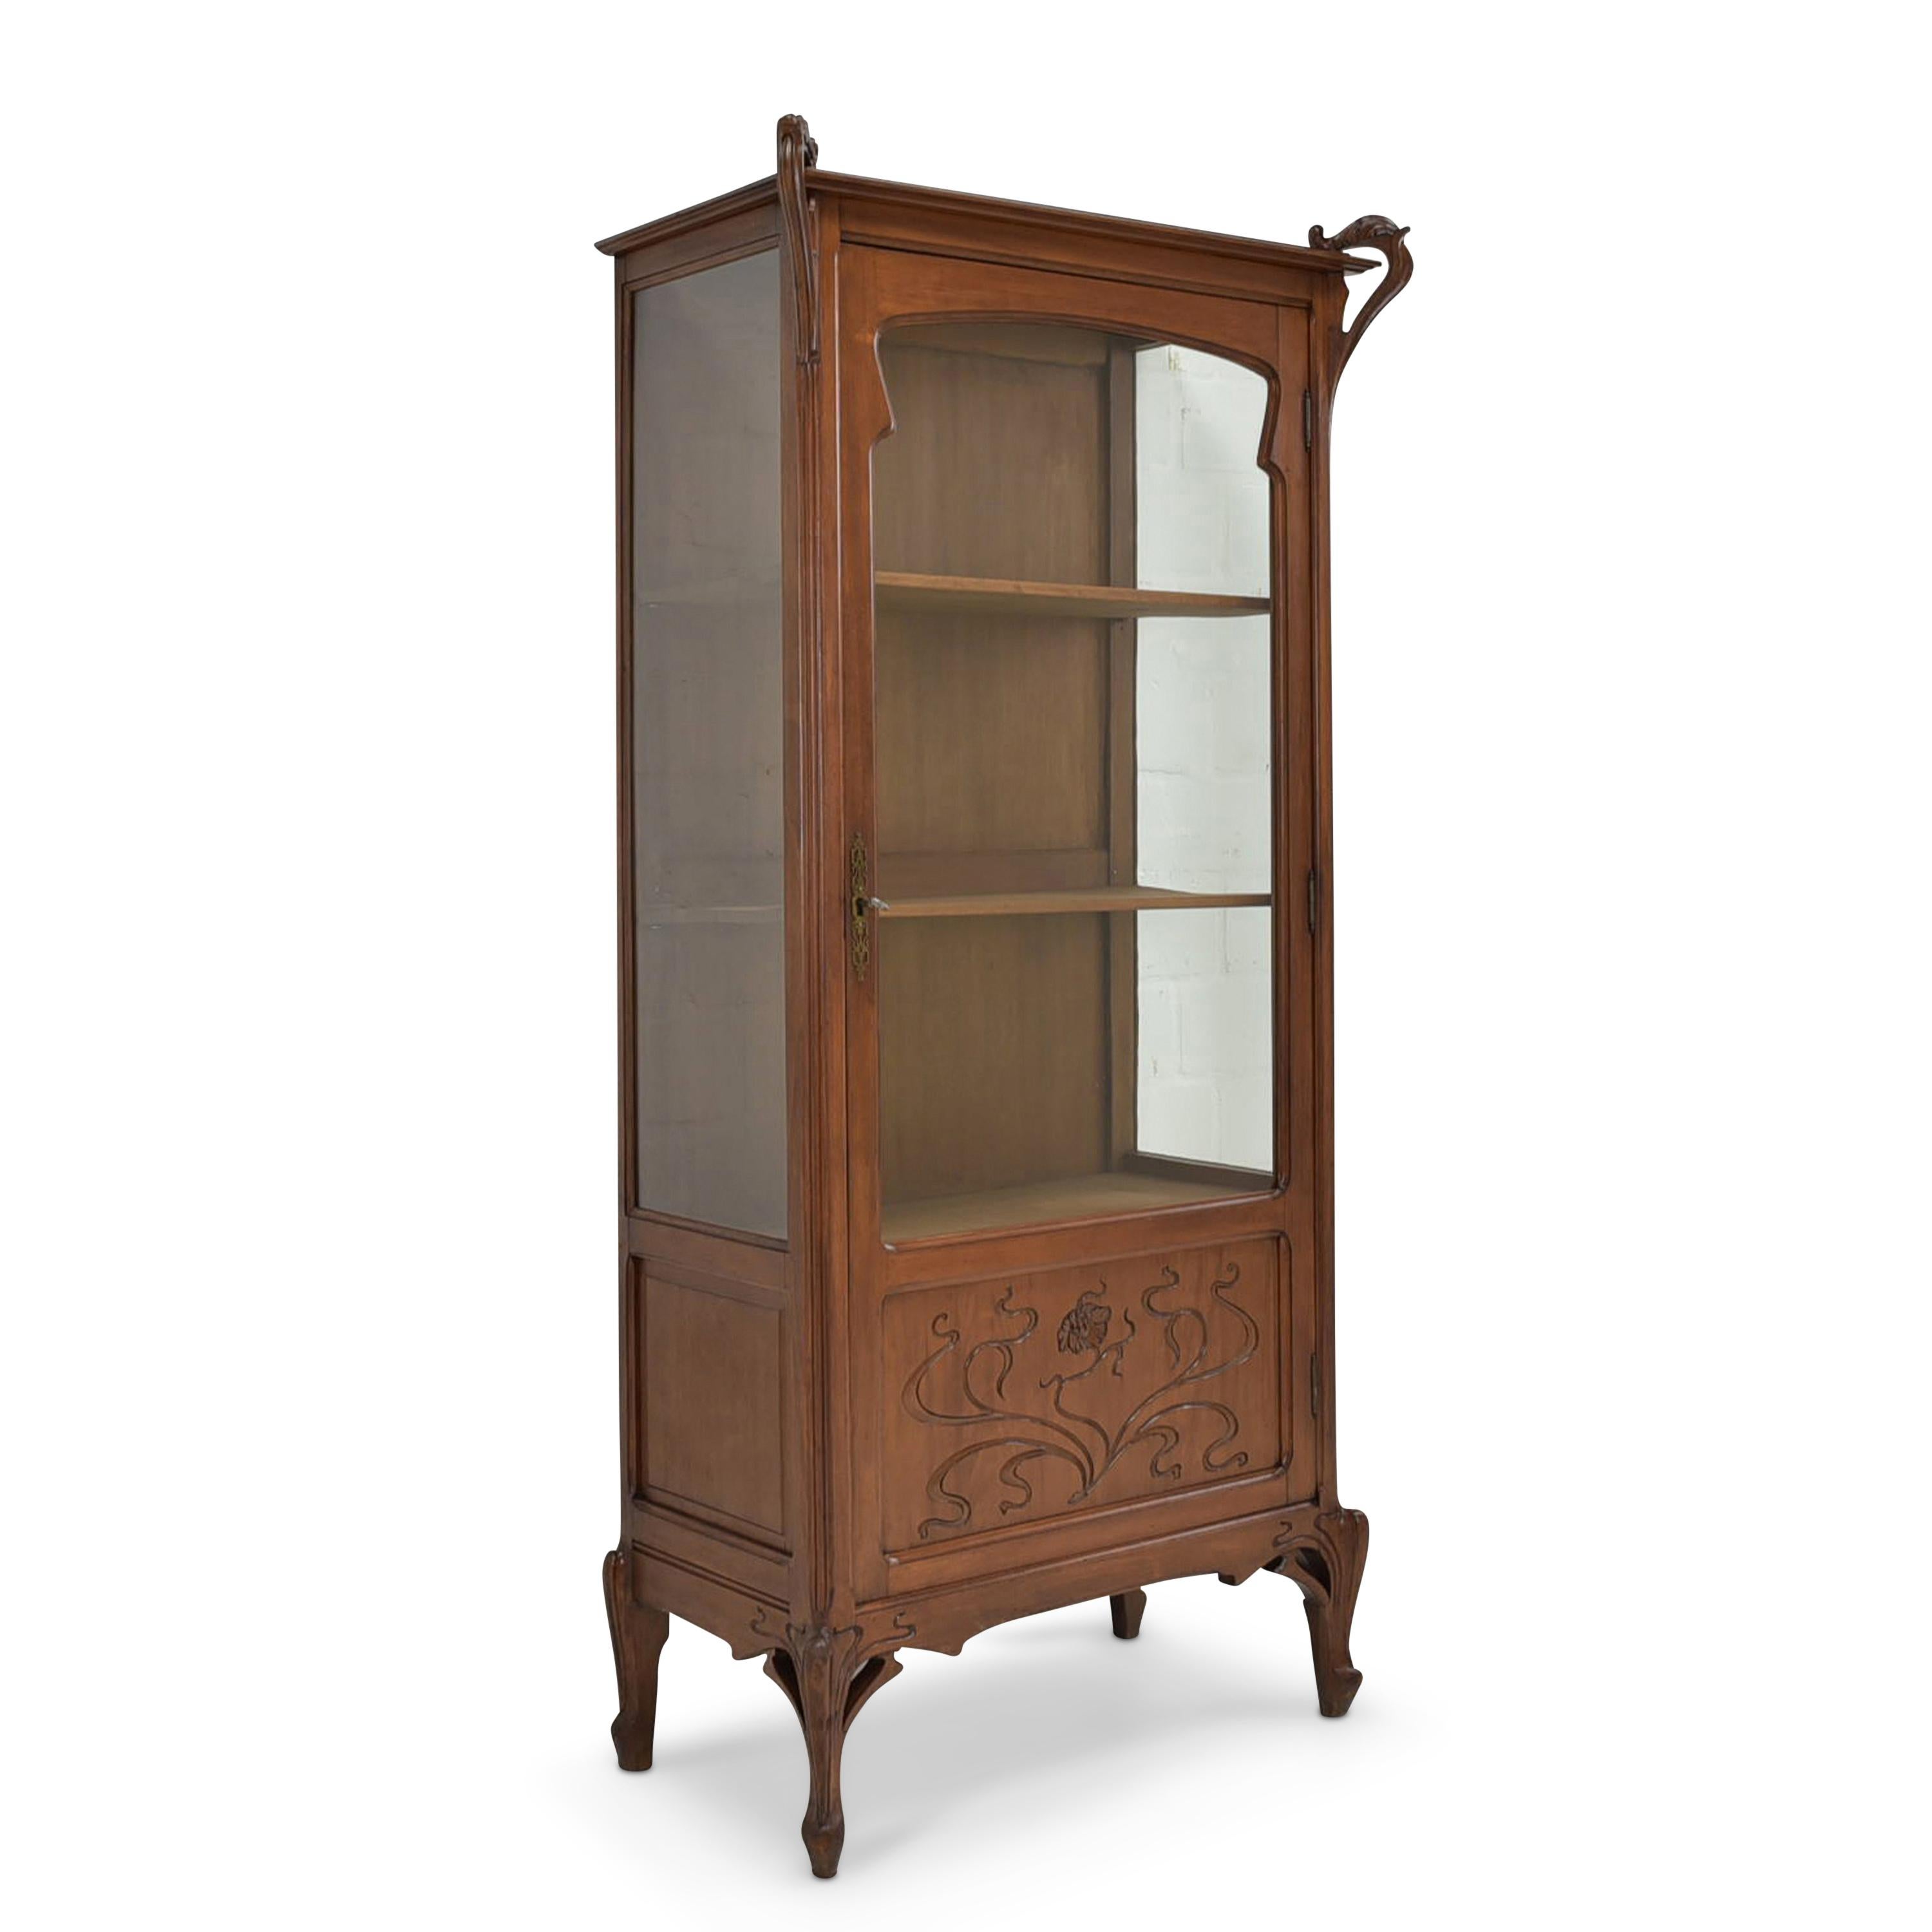 Showcase restored Art Nouveau 1910 walnut display cabinet

Features:
Three-sided, single-door model with three shelves
High quality
Original glazing
Beautiful organic shape and floral carved decor
Beautiful patina
Pure, French Art Nouveau